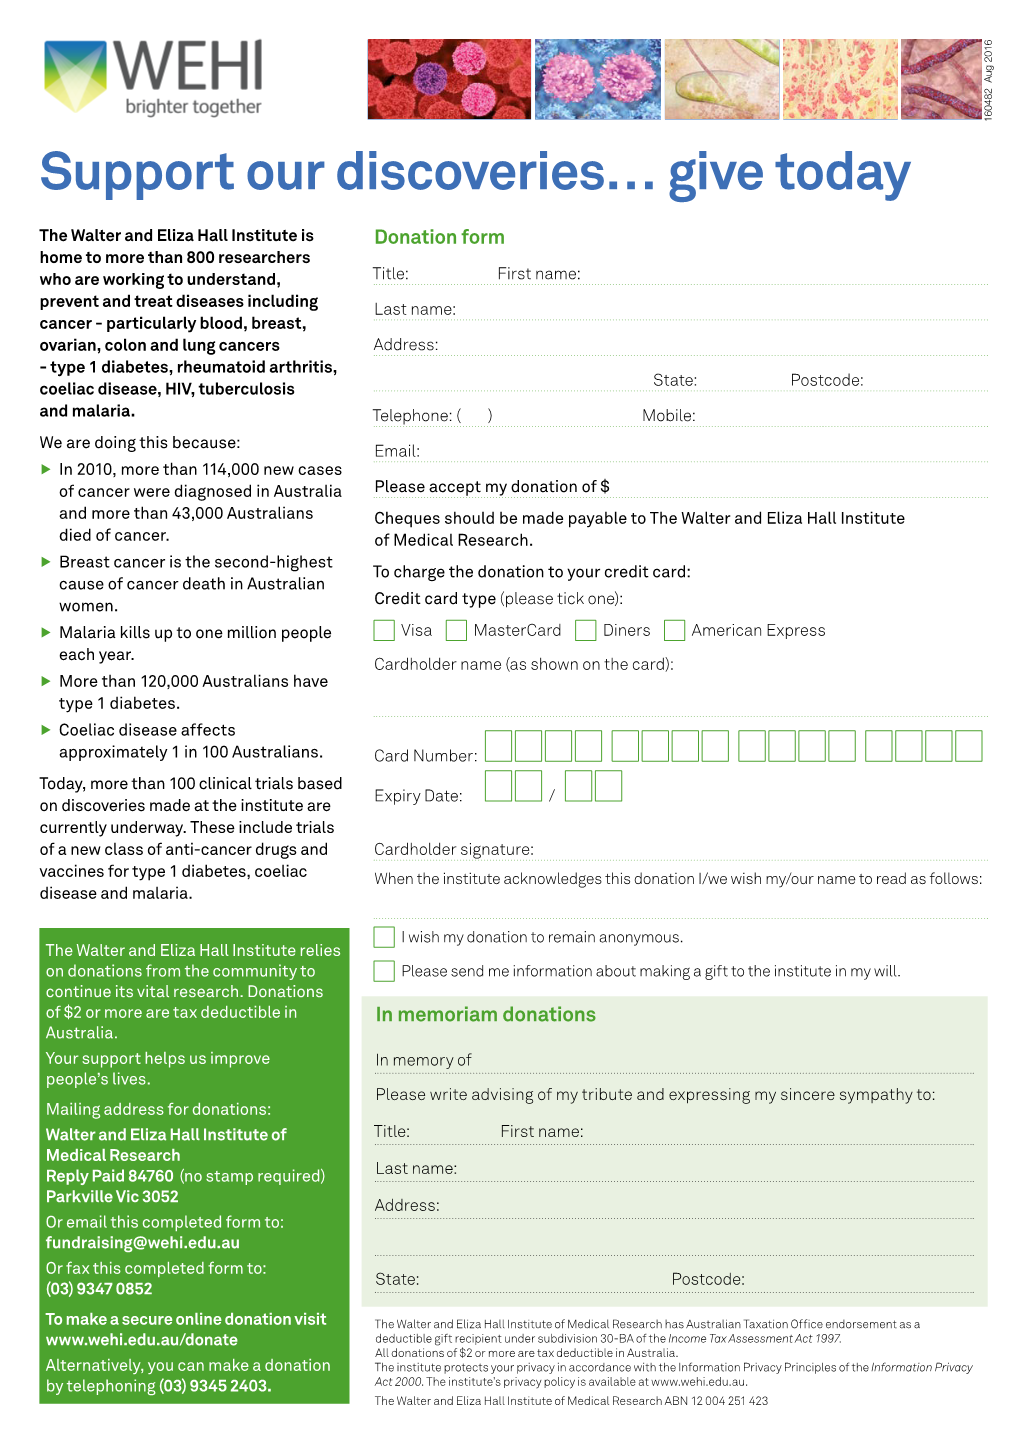 WEHI Donation Form 2011 110398